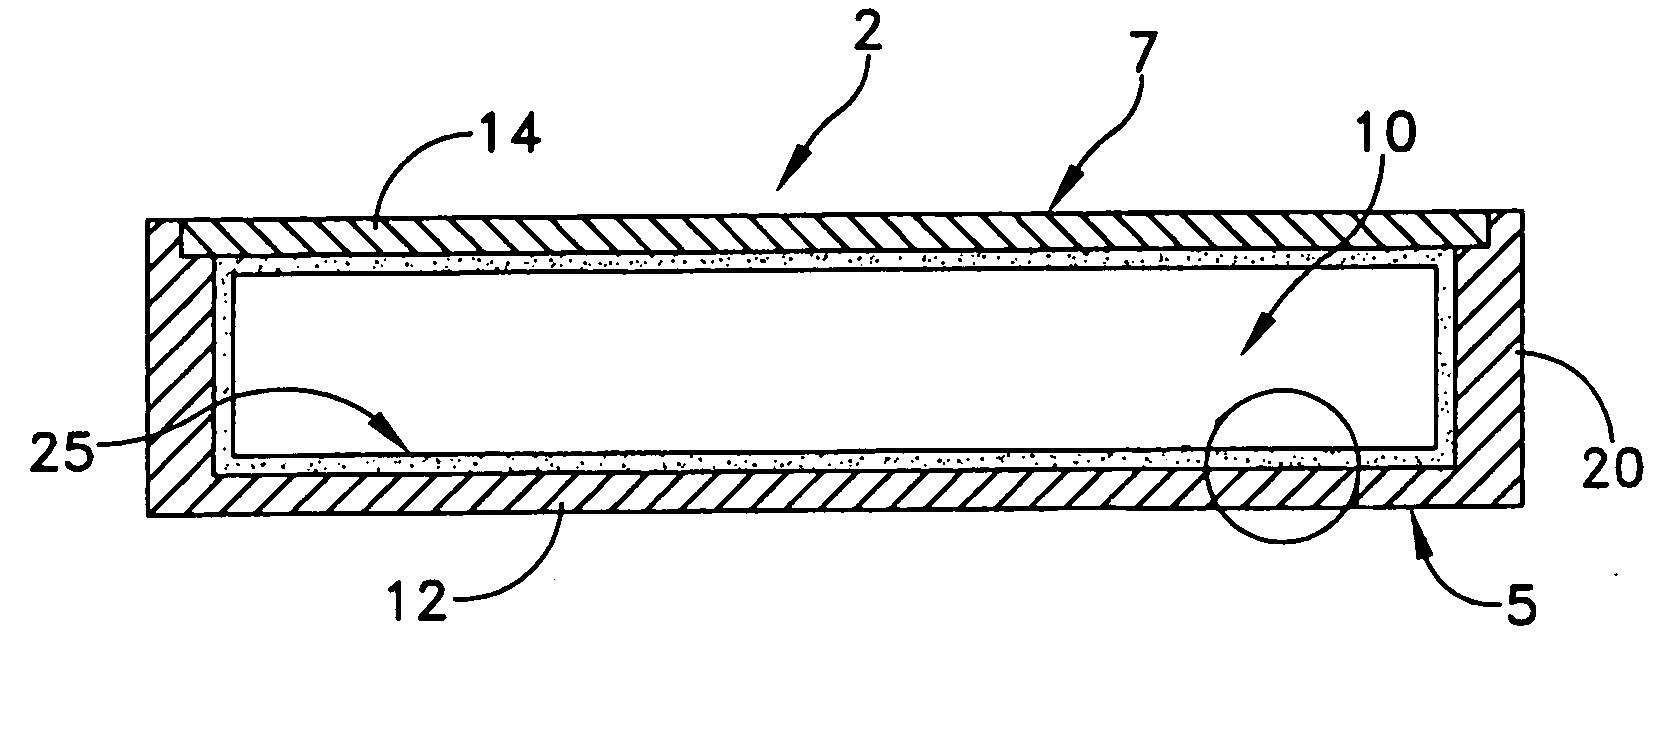 Heat transfer device and method of making same